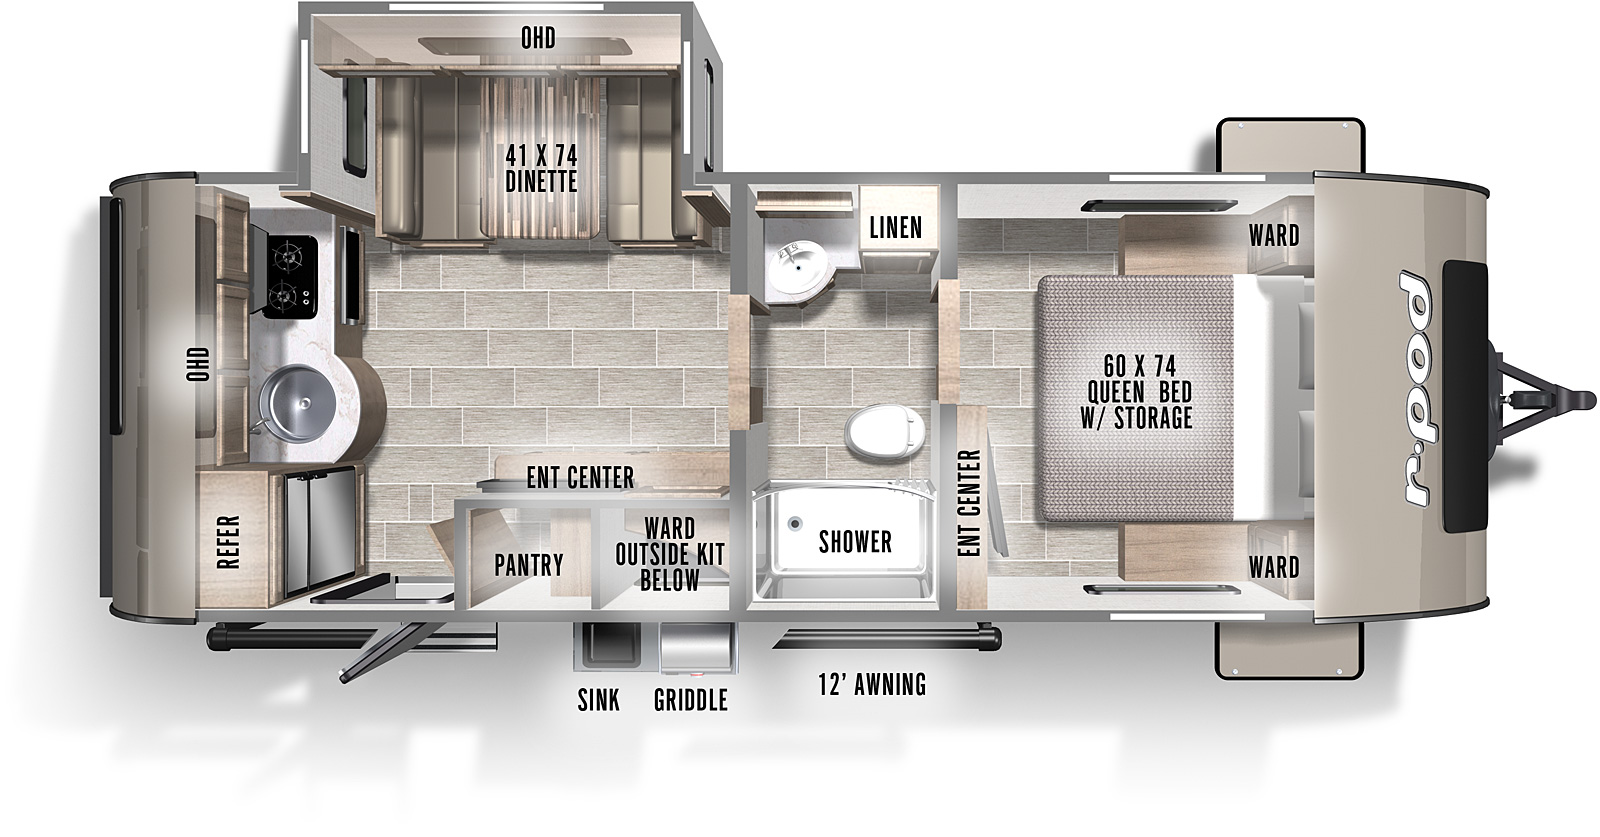 r-pod RP-202 floorplan. The RP-202 has one slide out and one entry door.